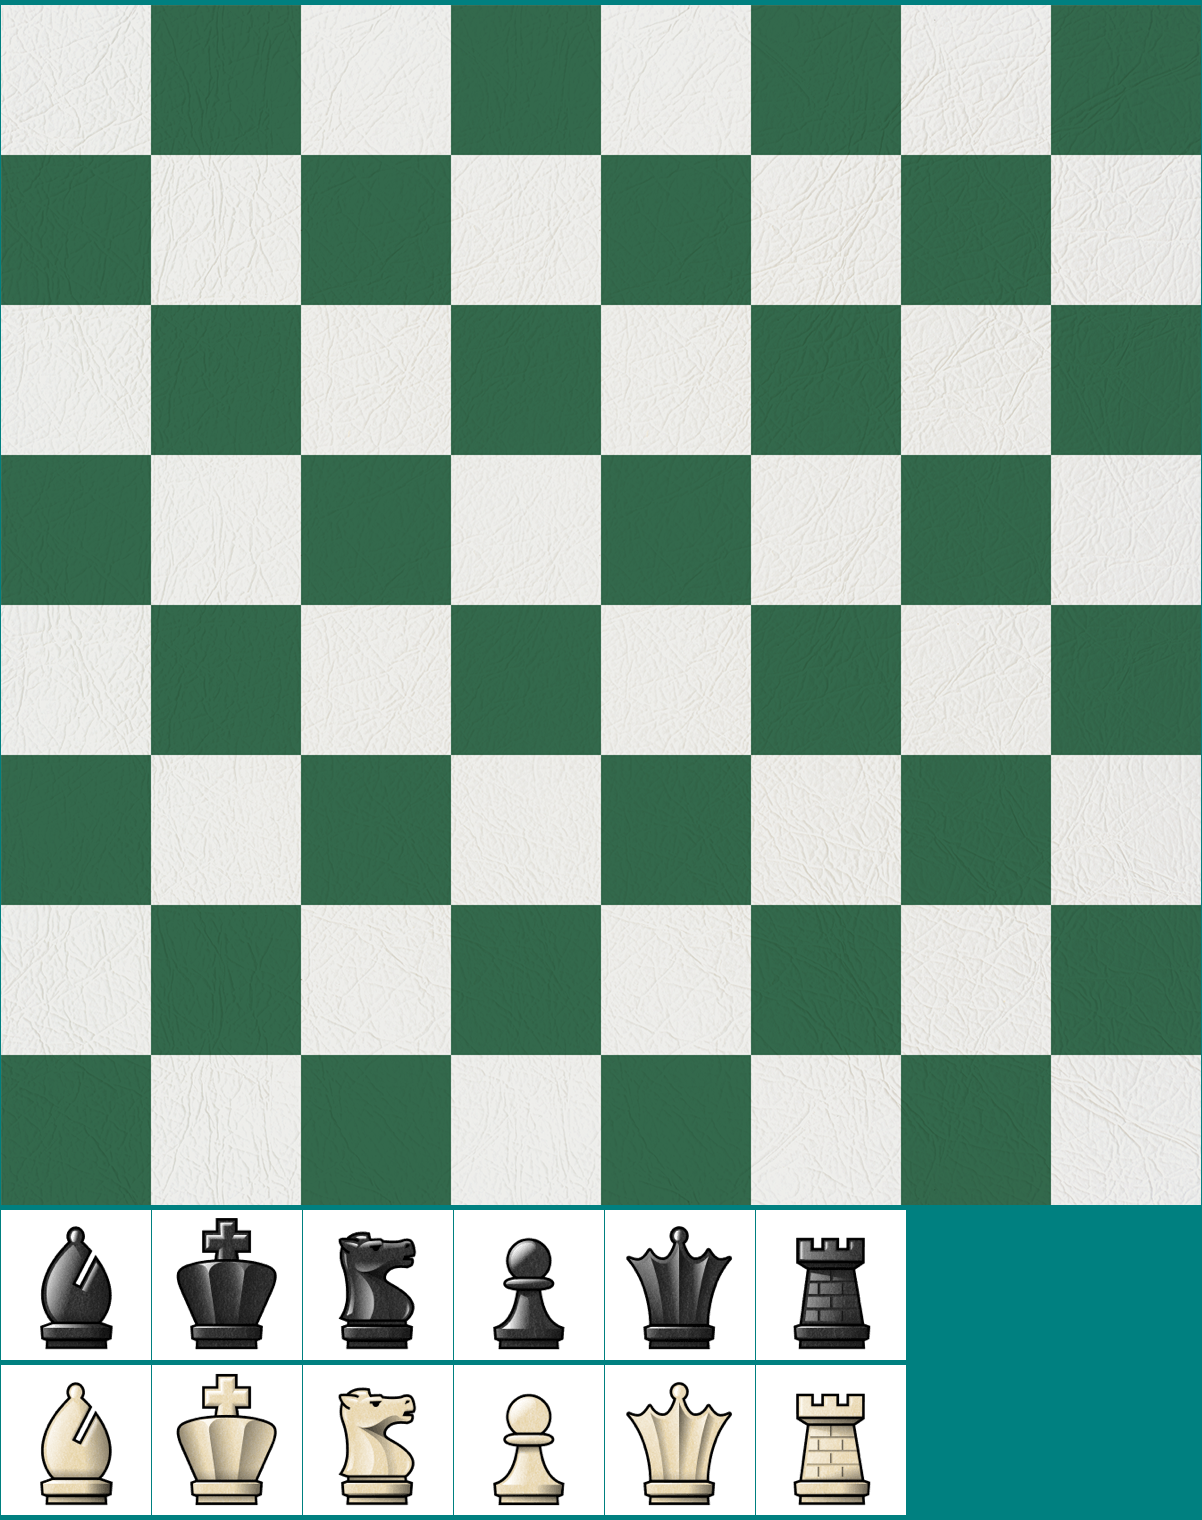 Board and Chess Pieces (Tournament)